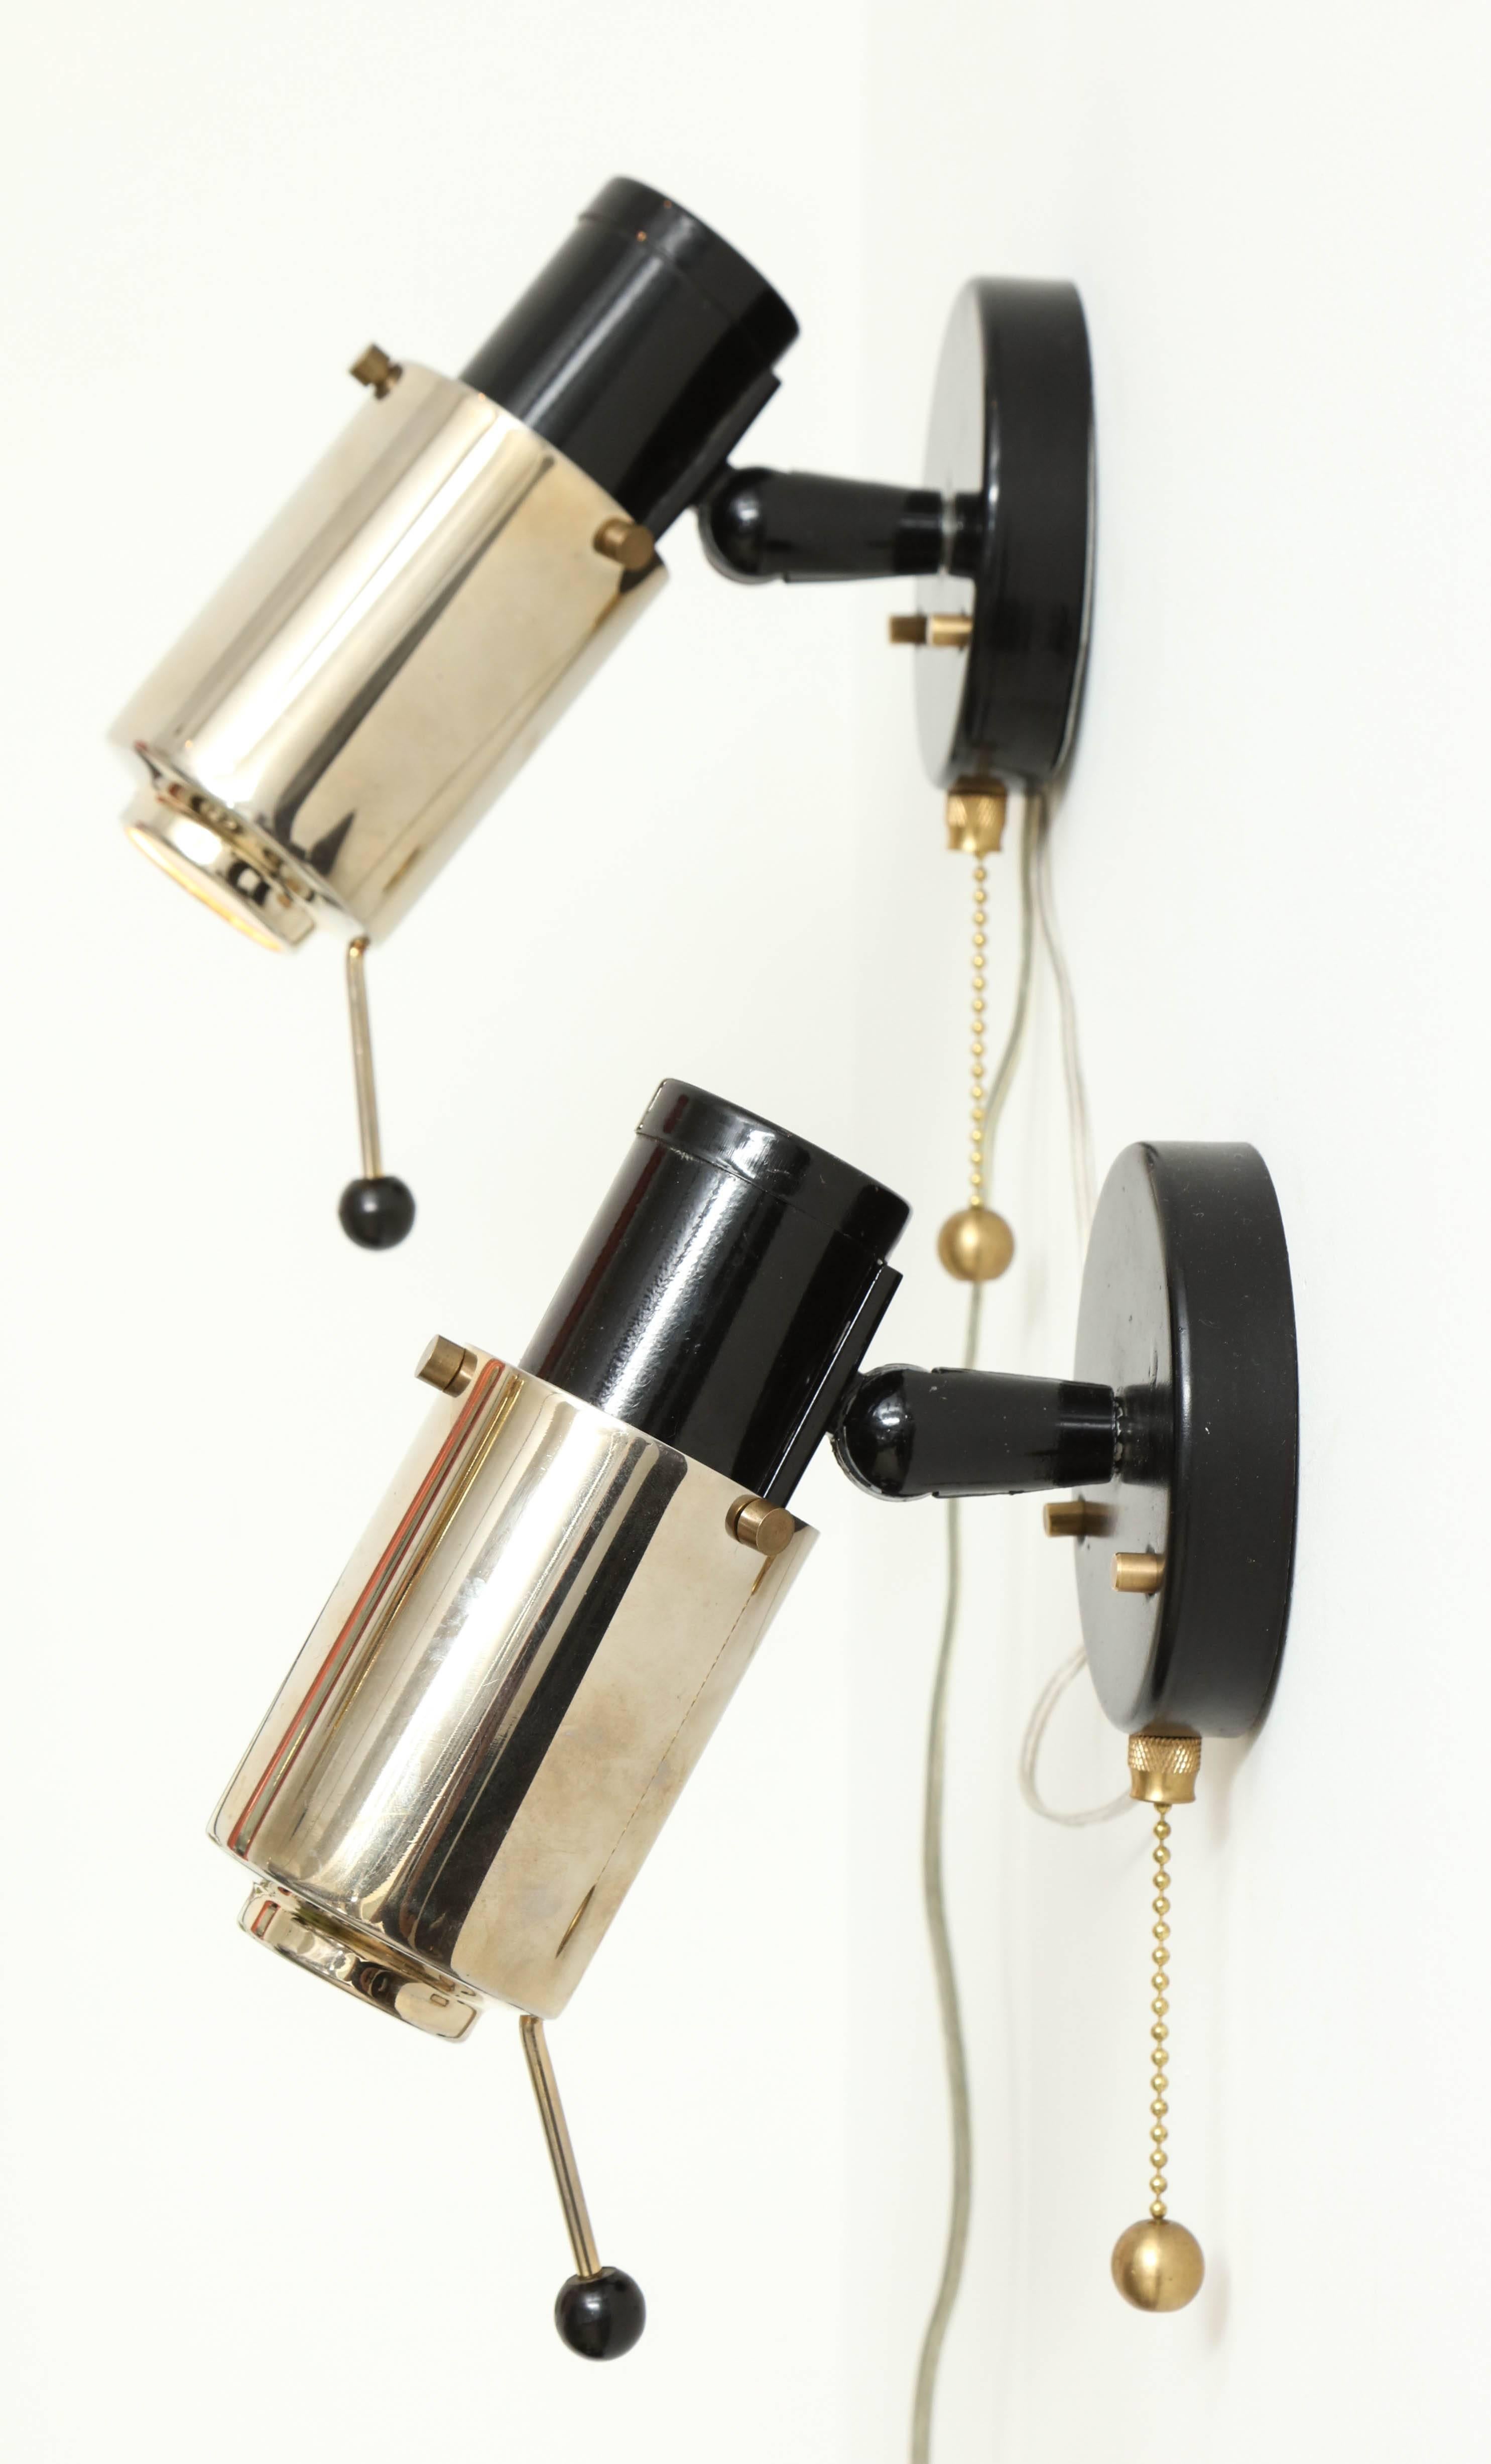 Adjustable sconce or reading lamps in polished nickel, black-painted steel and brass by Jacques Biny for Lita, circa 1960. Newly rewired for US usage and refitted with LED bulbs. An almost identical pair is also available.